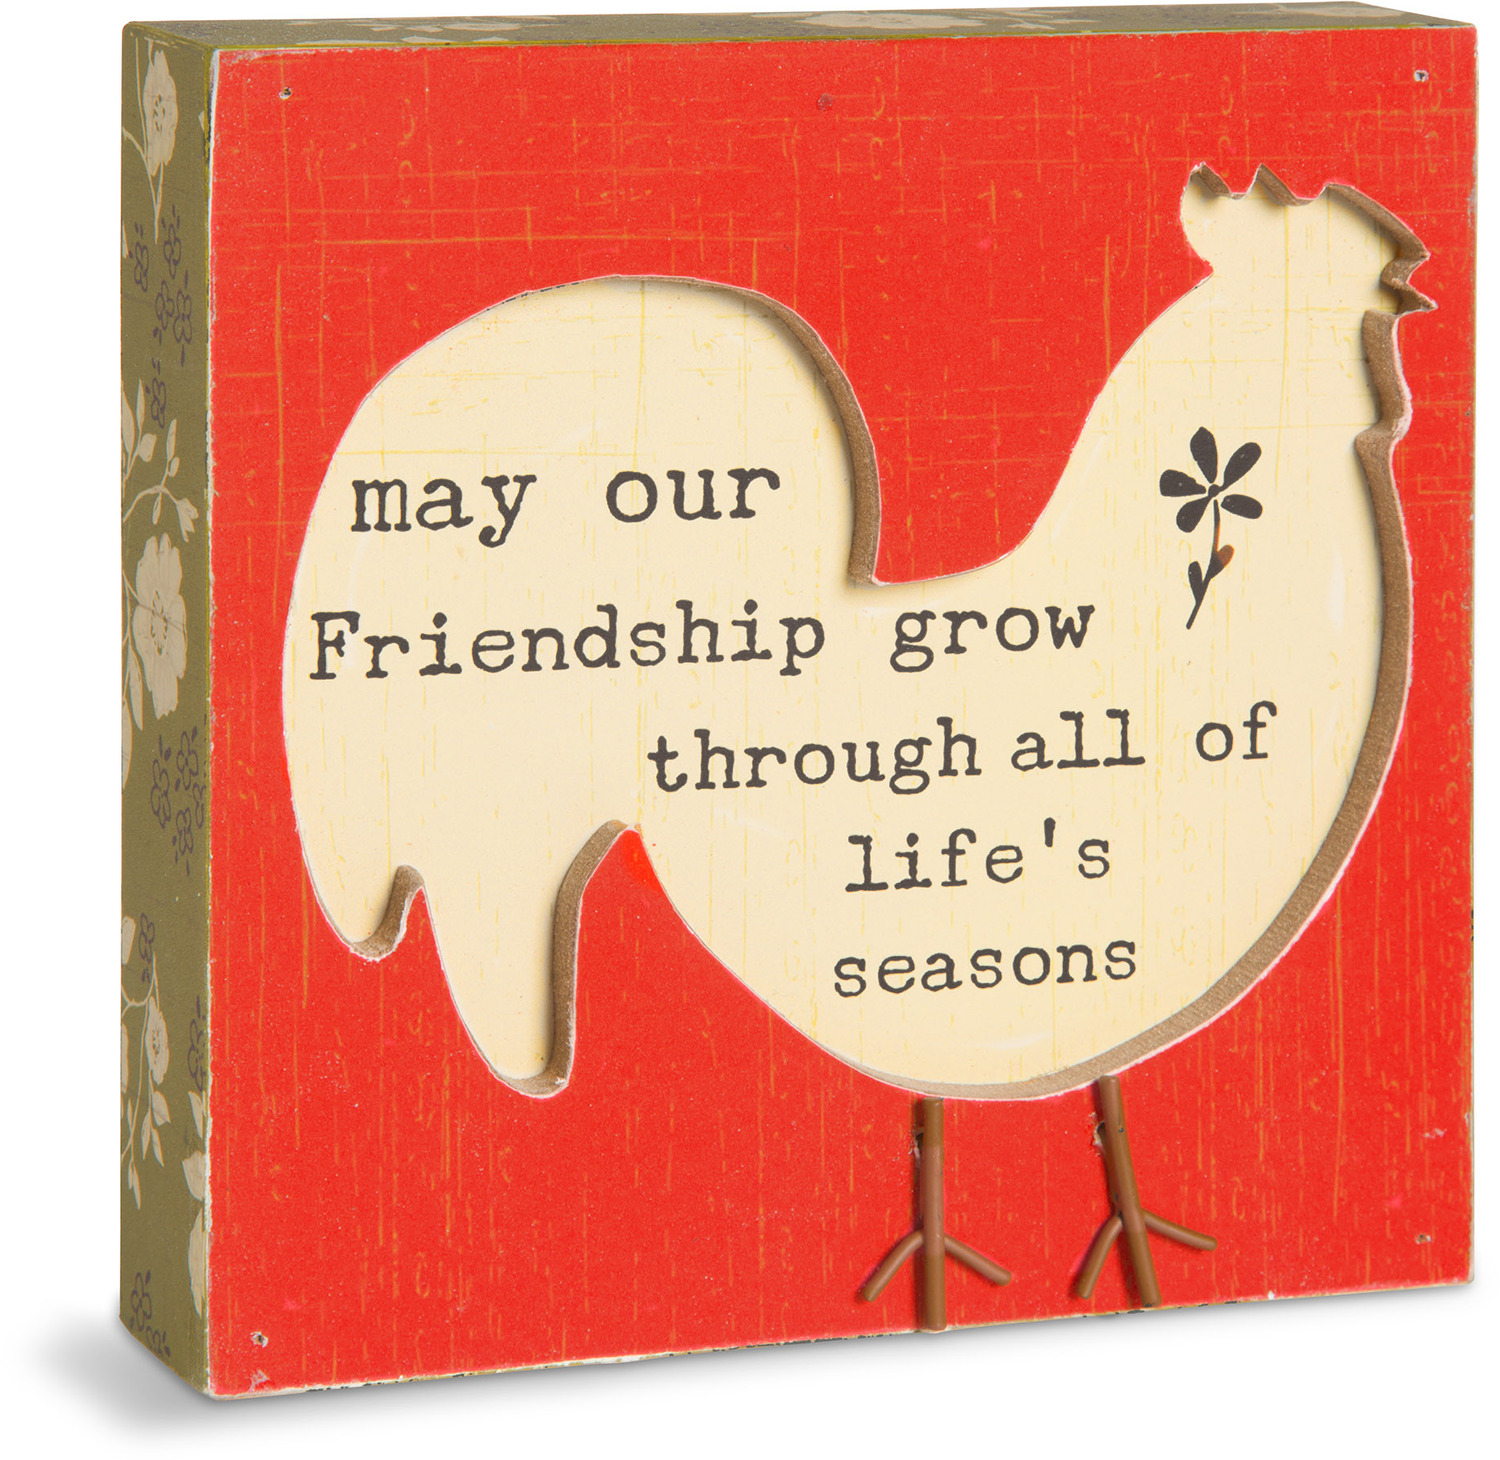 Friendship by Live Simply by Amylee - Friendship - 4.5" x 4.5" Plaque